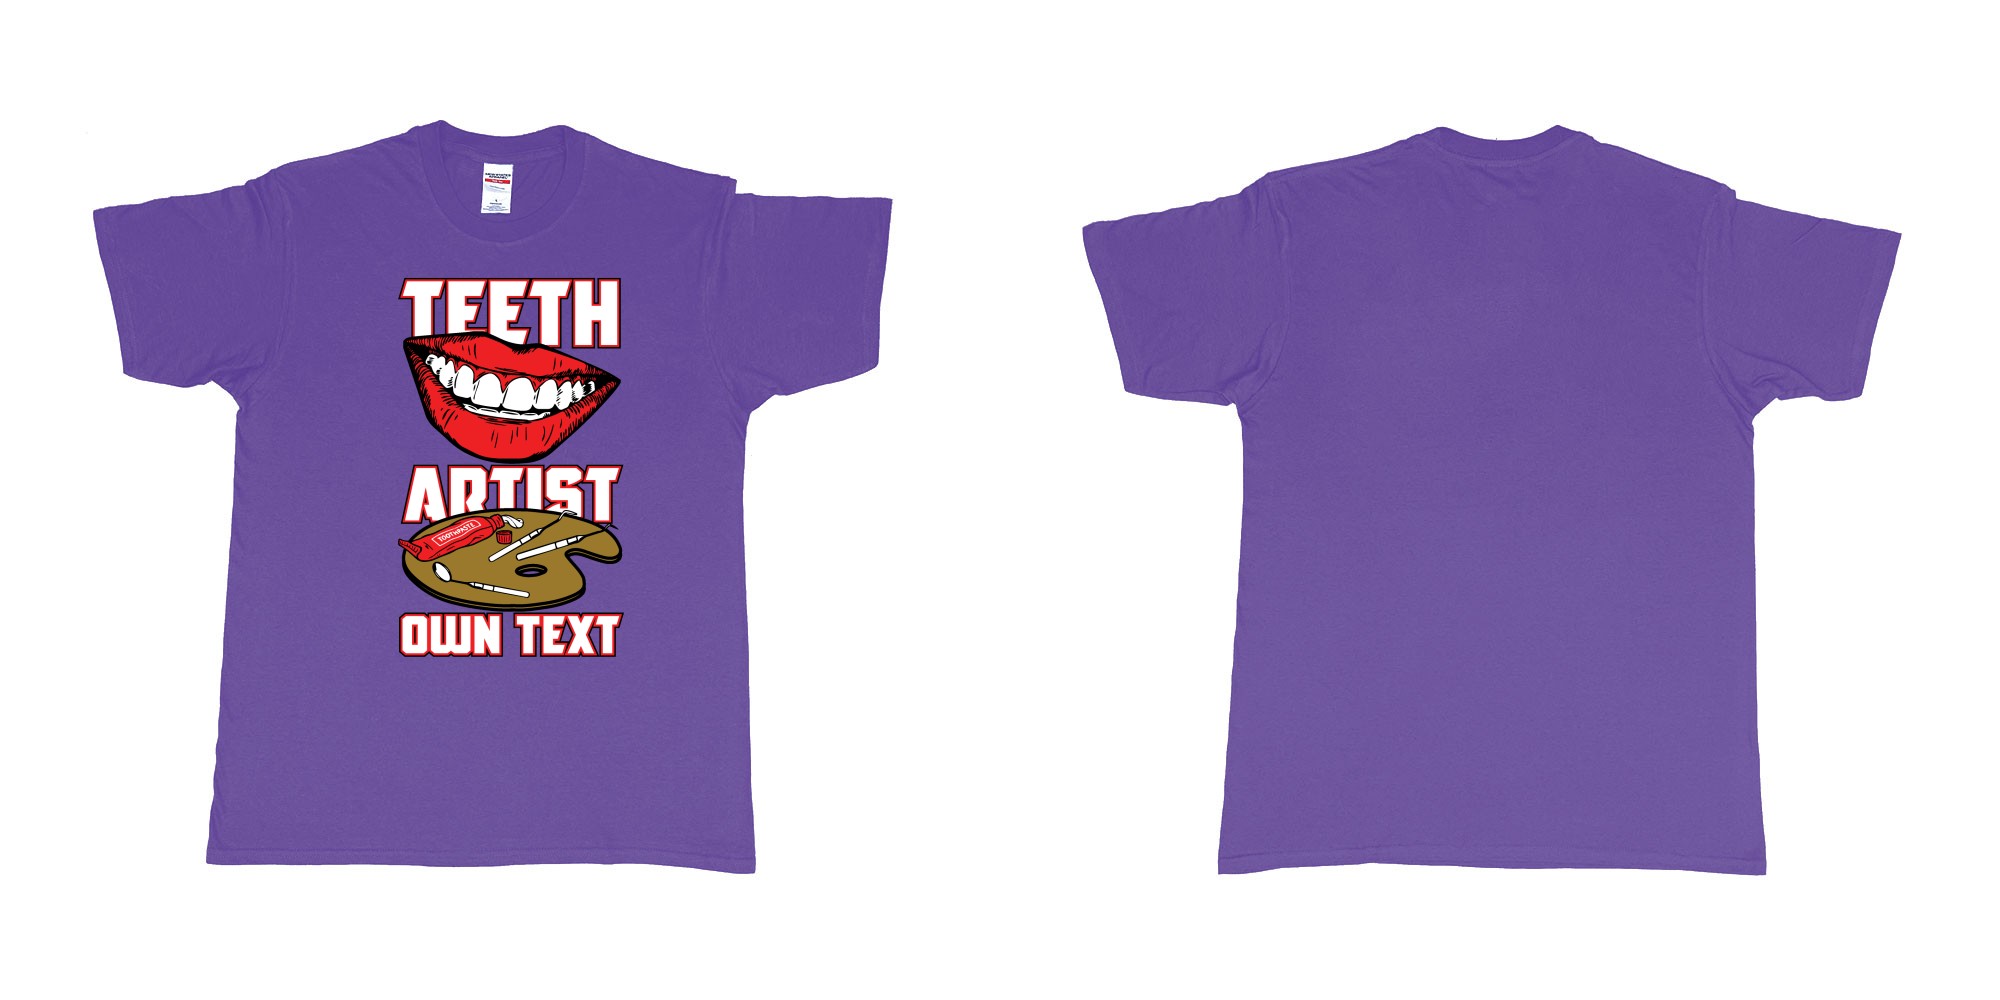 Custom tshirt design teeth artist own custom text tshirt print dentist bali in fabric color purple choice your own text made in Bali by The Pirate Way